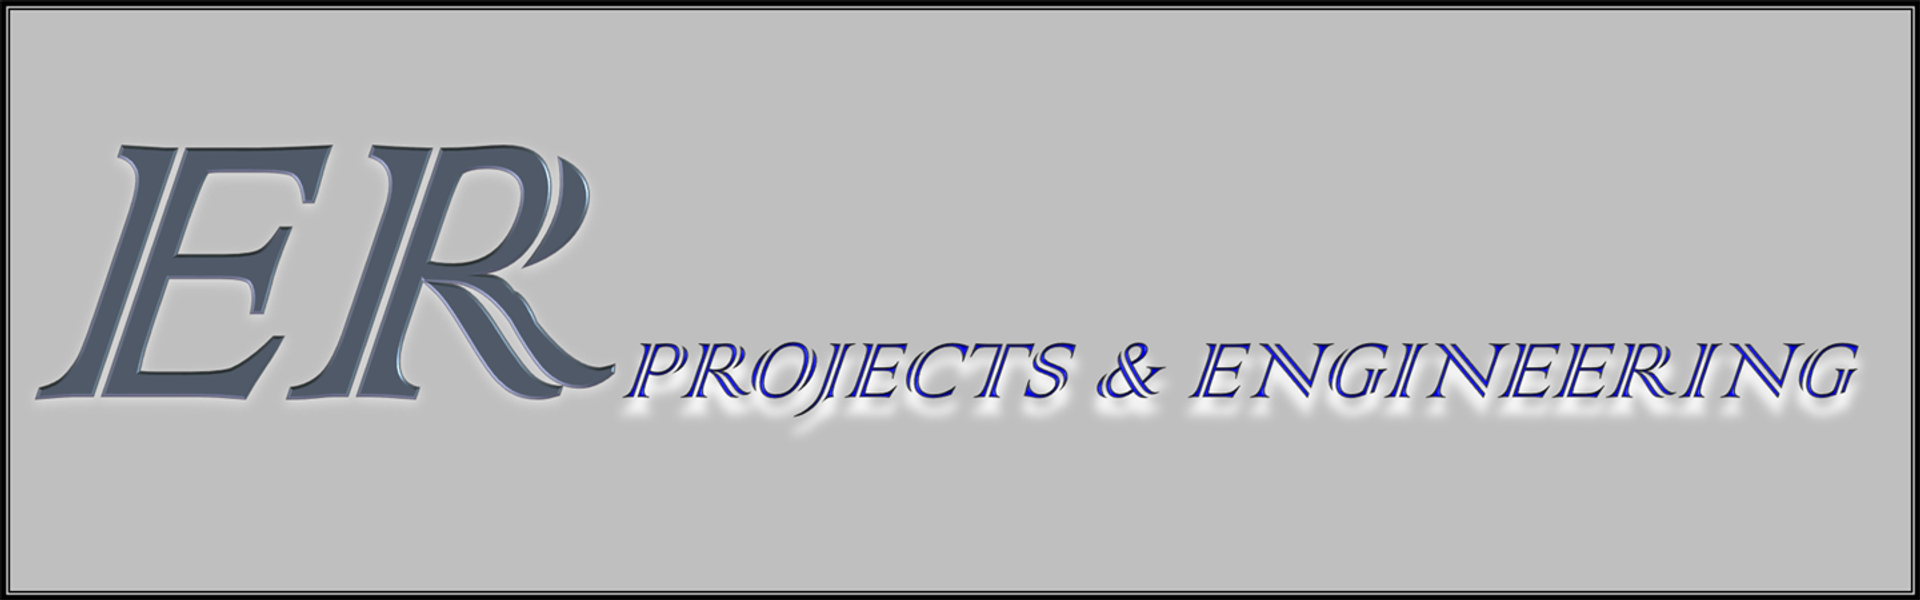 ER Projects & Engineering